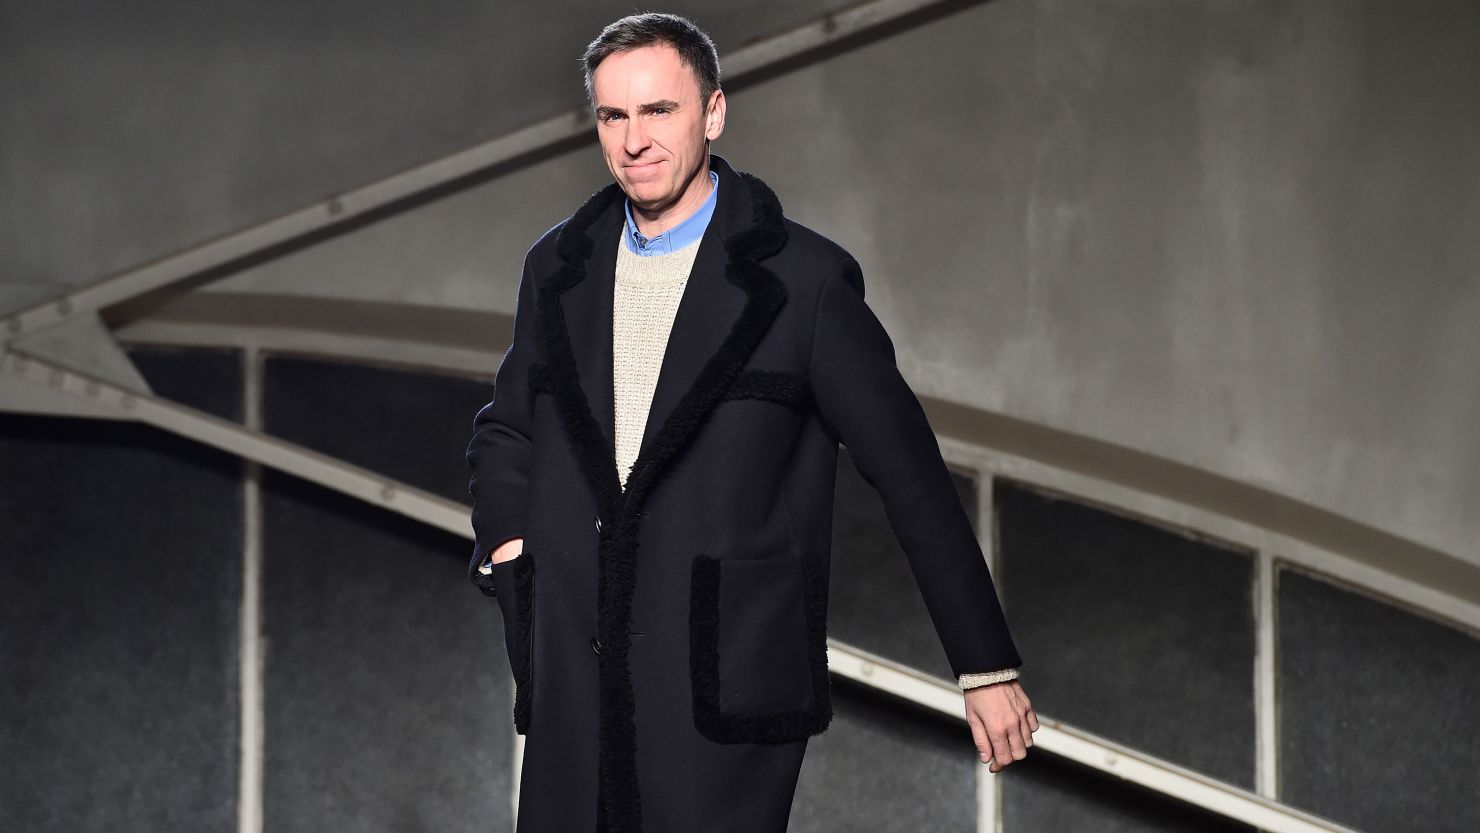 Raf Simons: Everything You Need to Know About the Fashion Designer